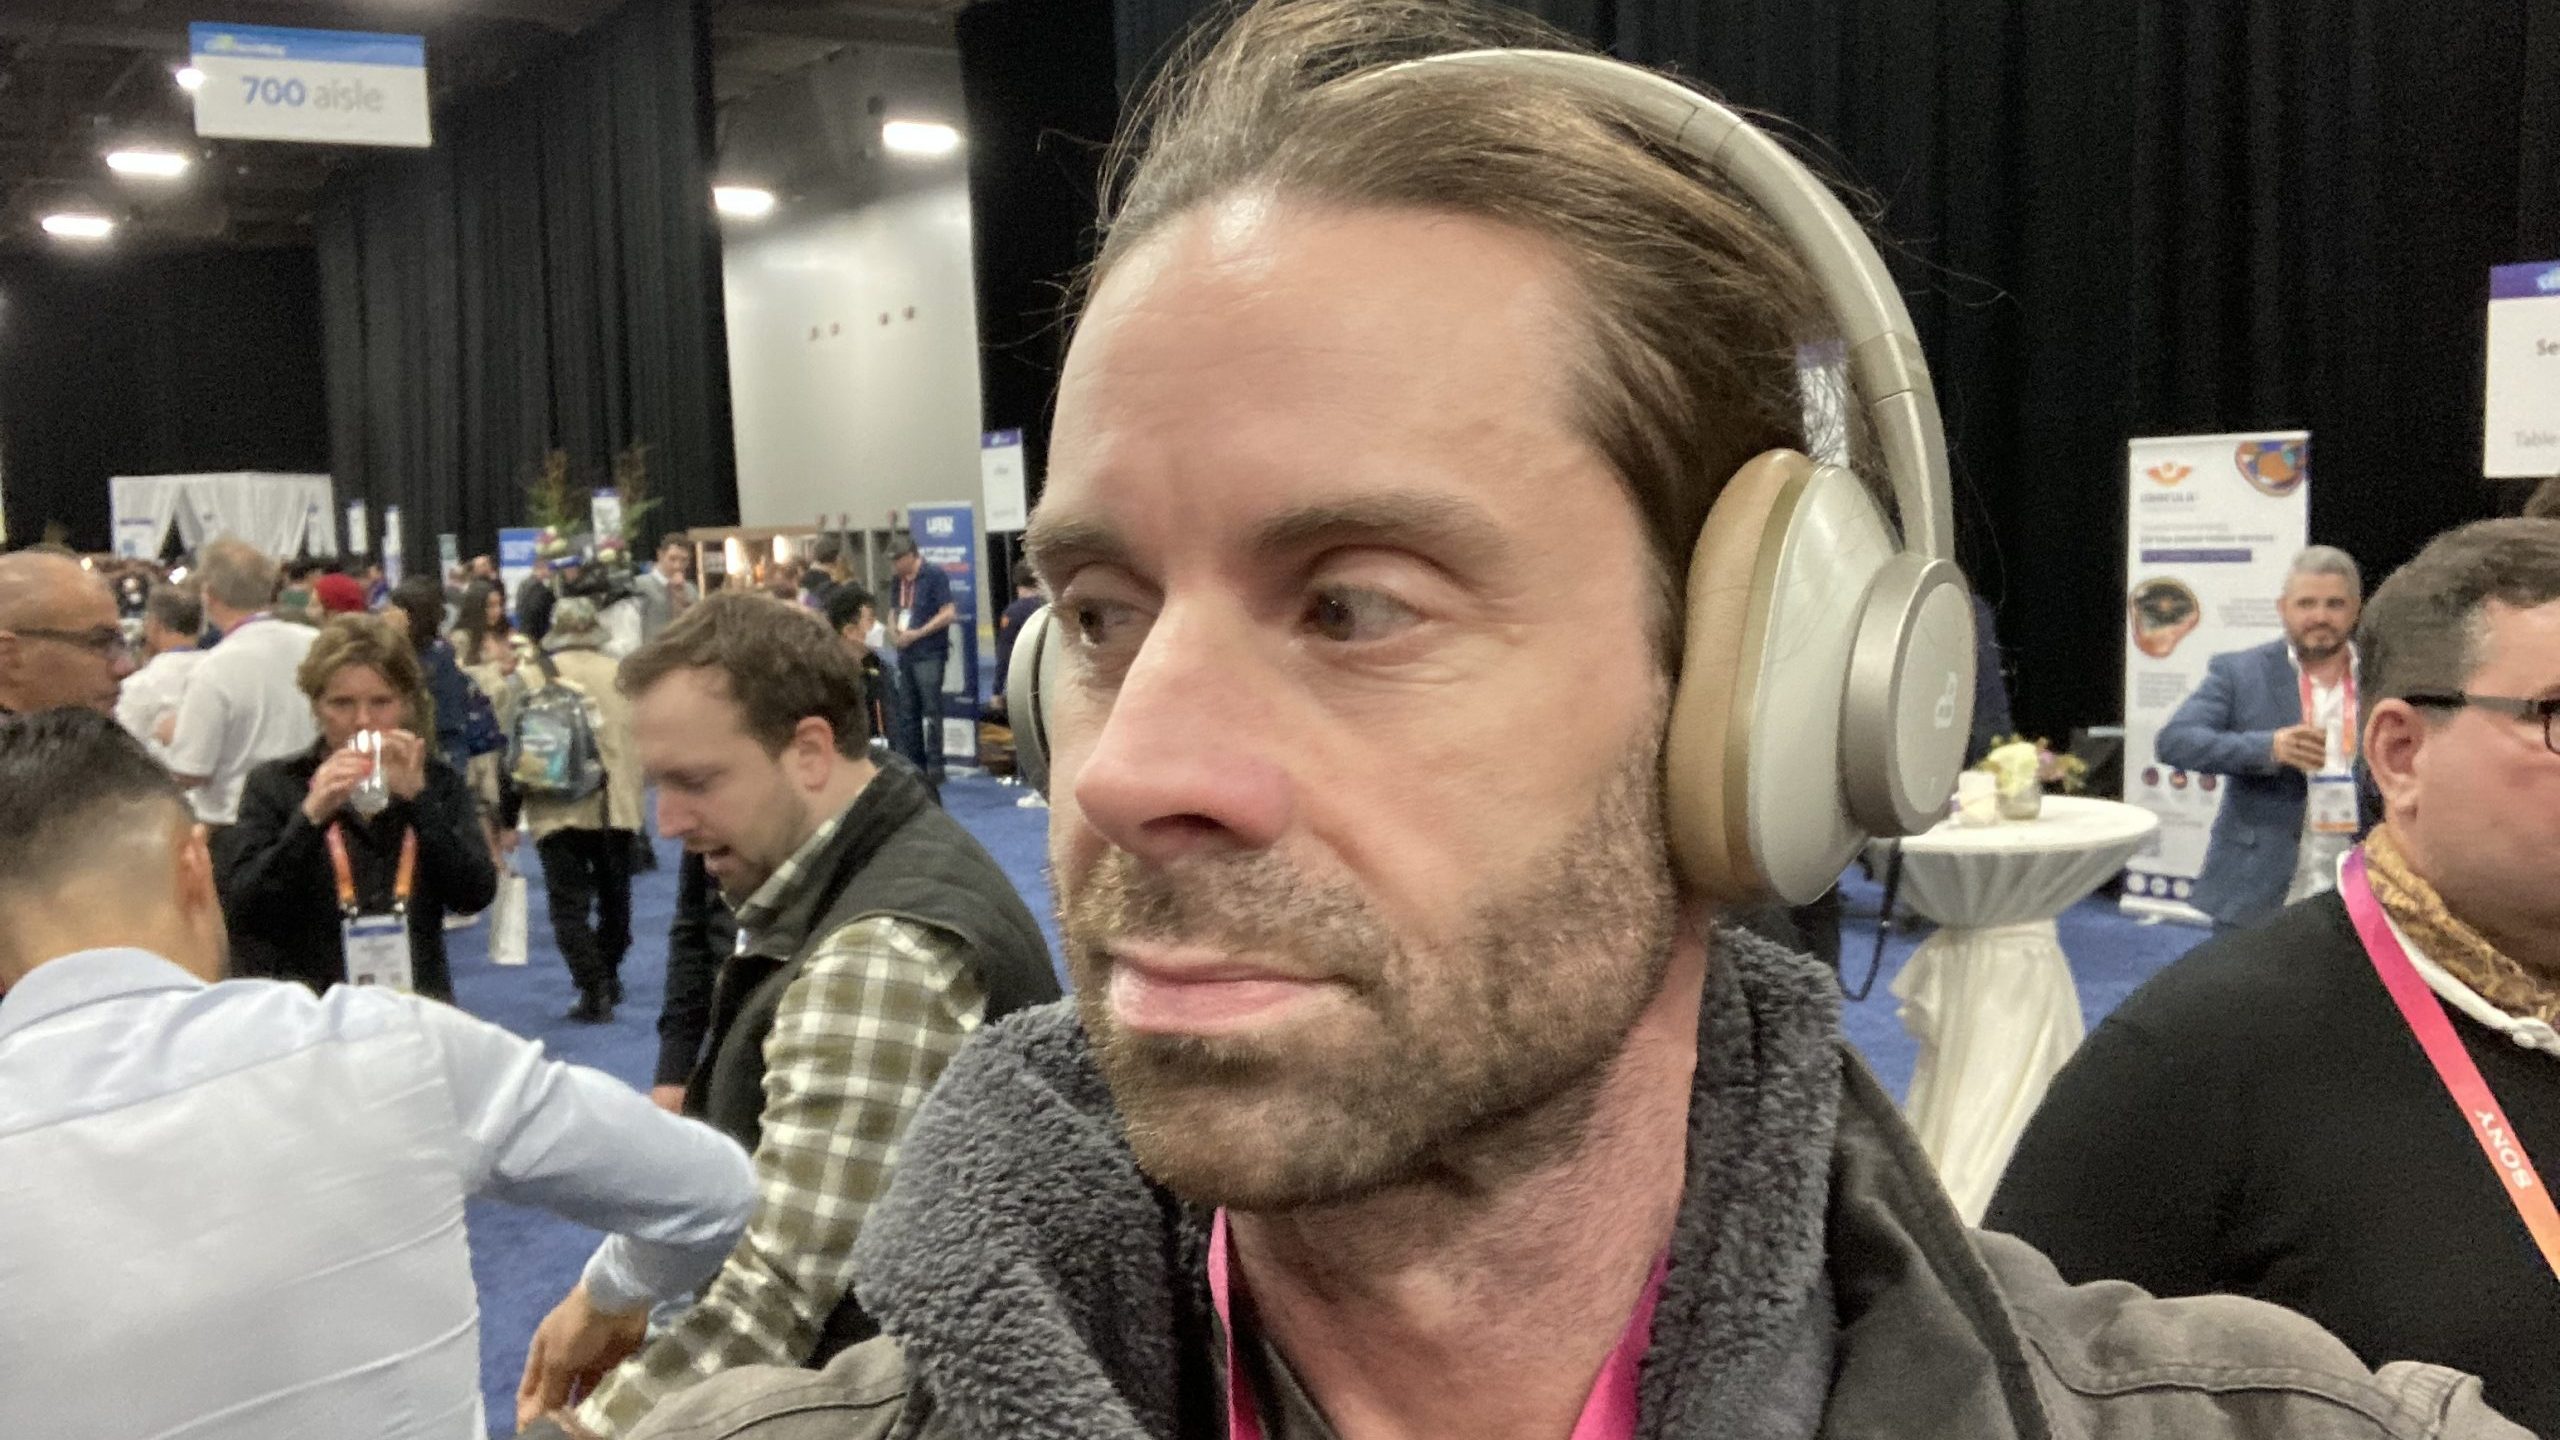 DeeBee's new wireless ANC headphone as worn by AJ at CES.